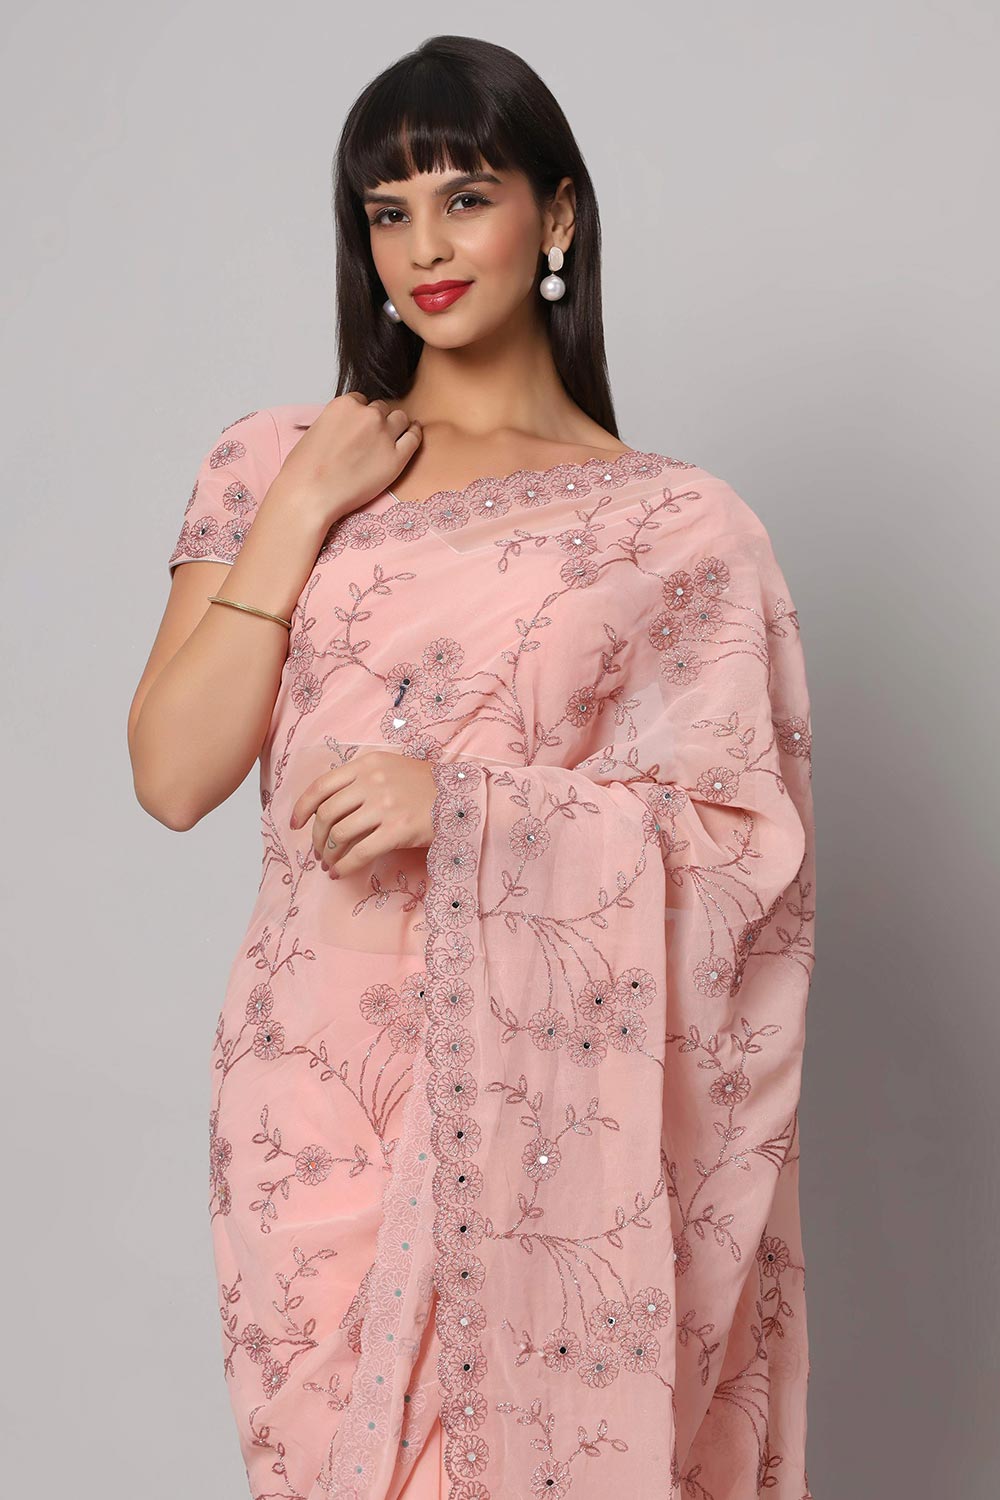 Esha Dusty Rose Embroidered Mirror Work One Minute Saree